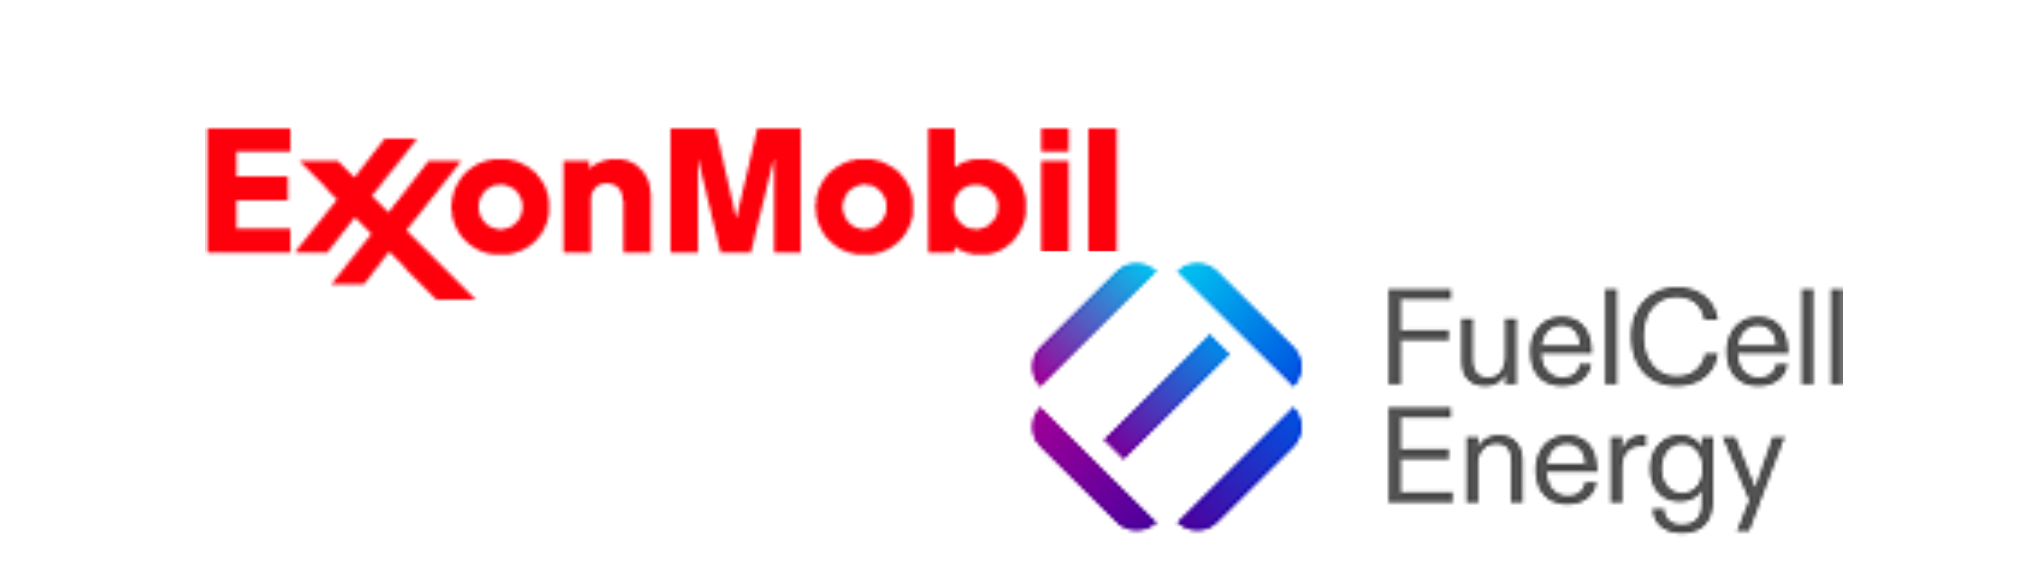  ExxonMobil and FuelCell Energy's innovative carbonate fuel cell (CFC) technology aims to capture CO2 emissions from industrial sources, potentially revolutionizing carbon capture by enhancing efficiency and providing valuable co-products while contributing to decarbonization efforts.